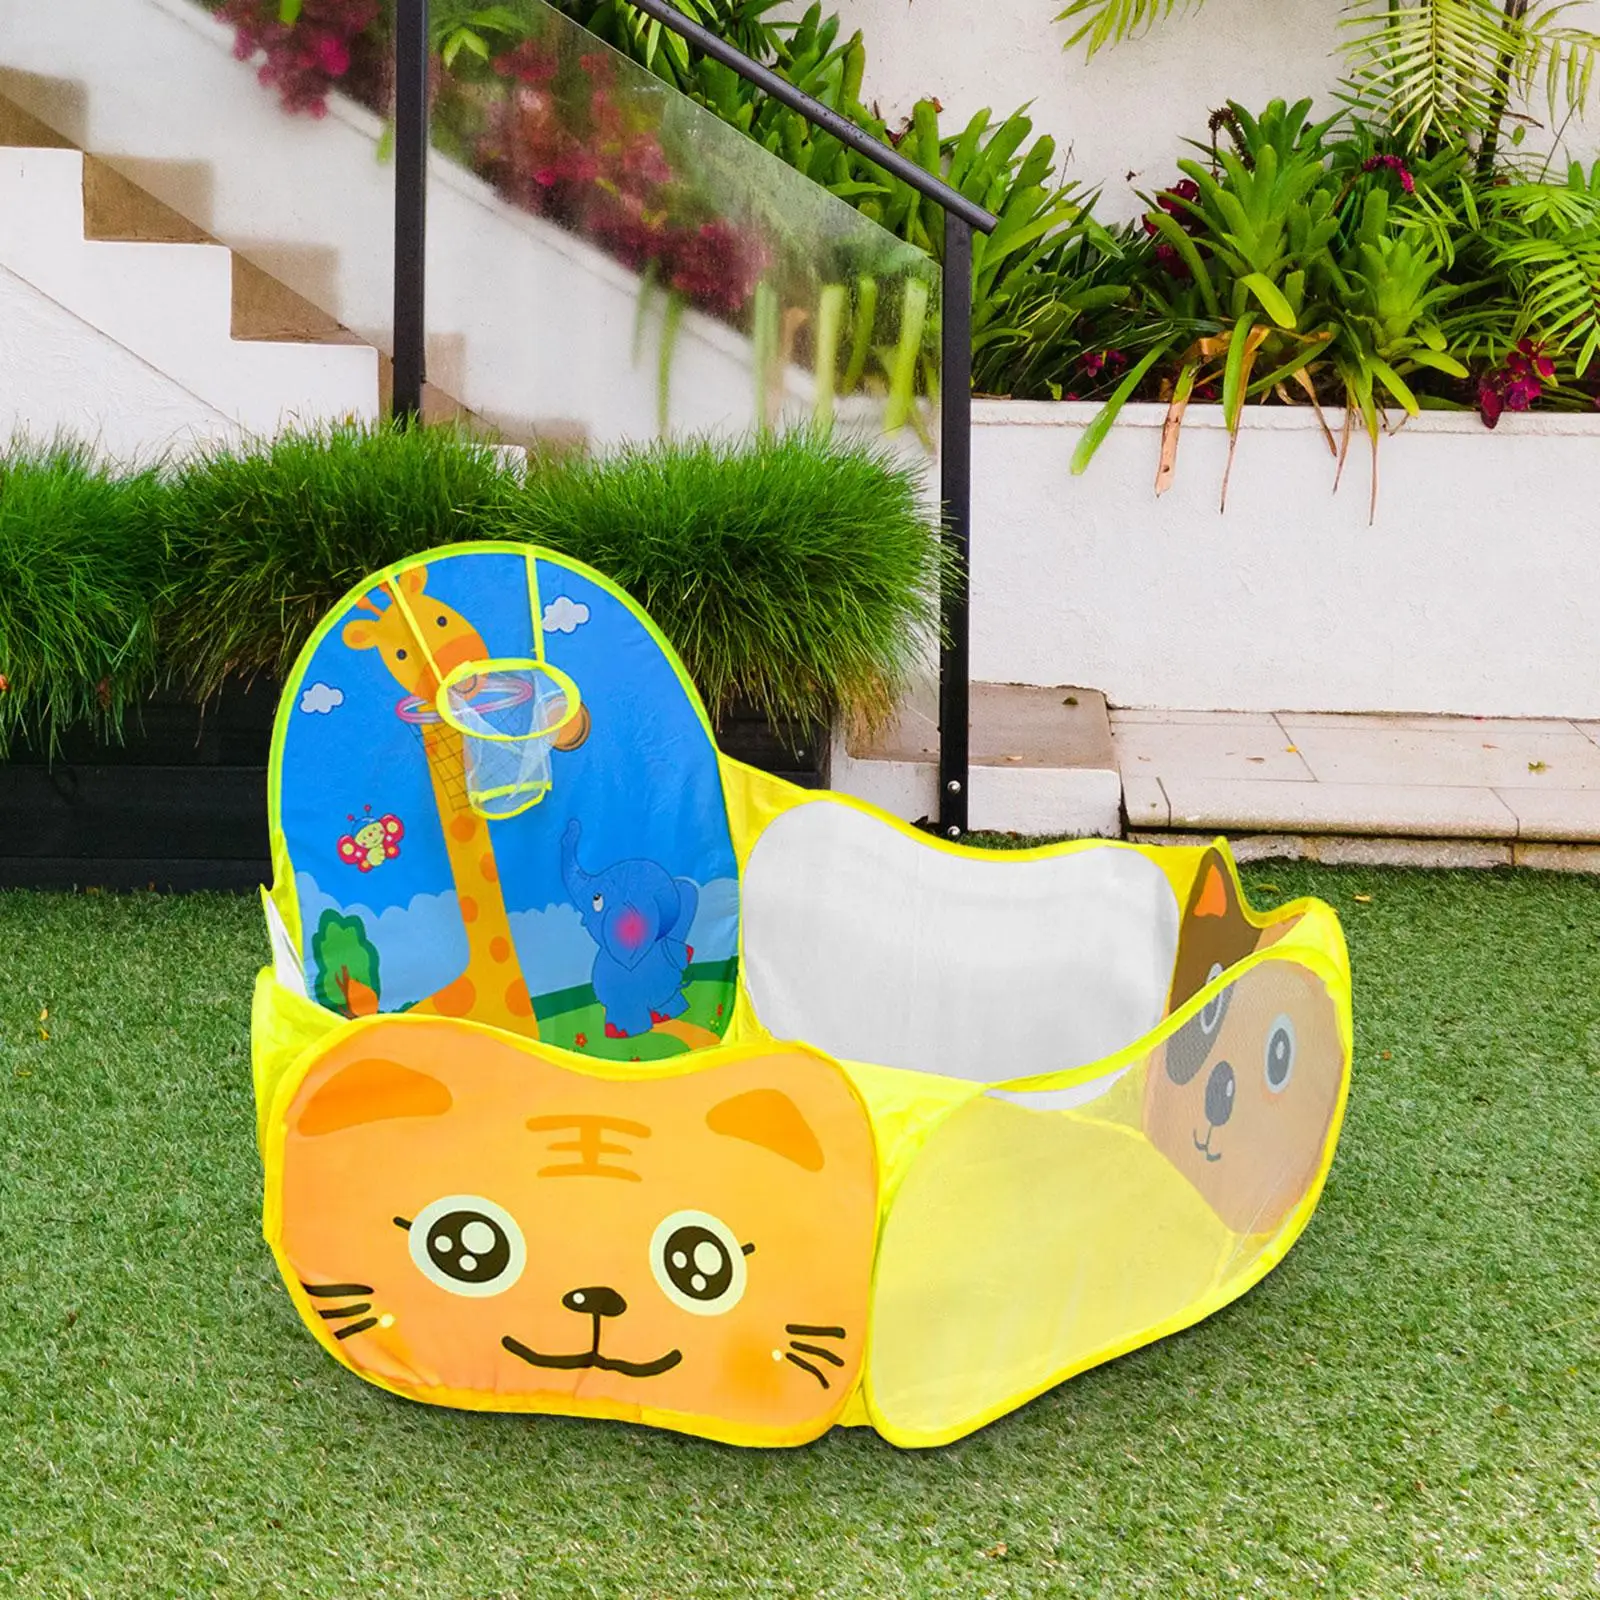 Childrens Ball Play Tent Child Room Decoration Playpen Ball Pool Foldable Tent for Boy Girls Kids Children Toddlers